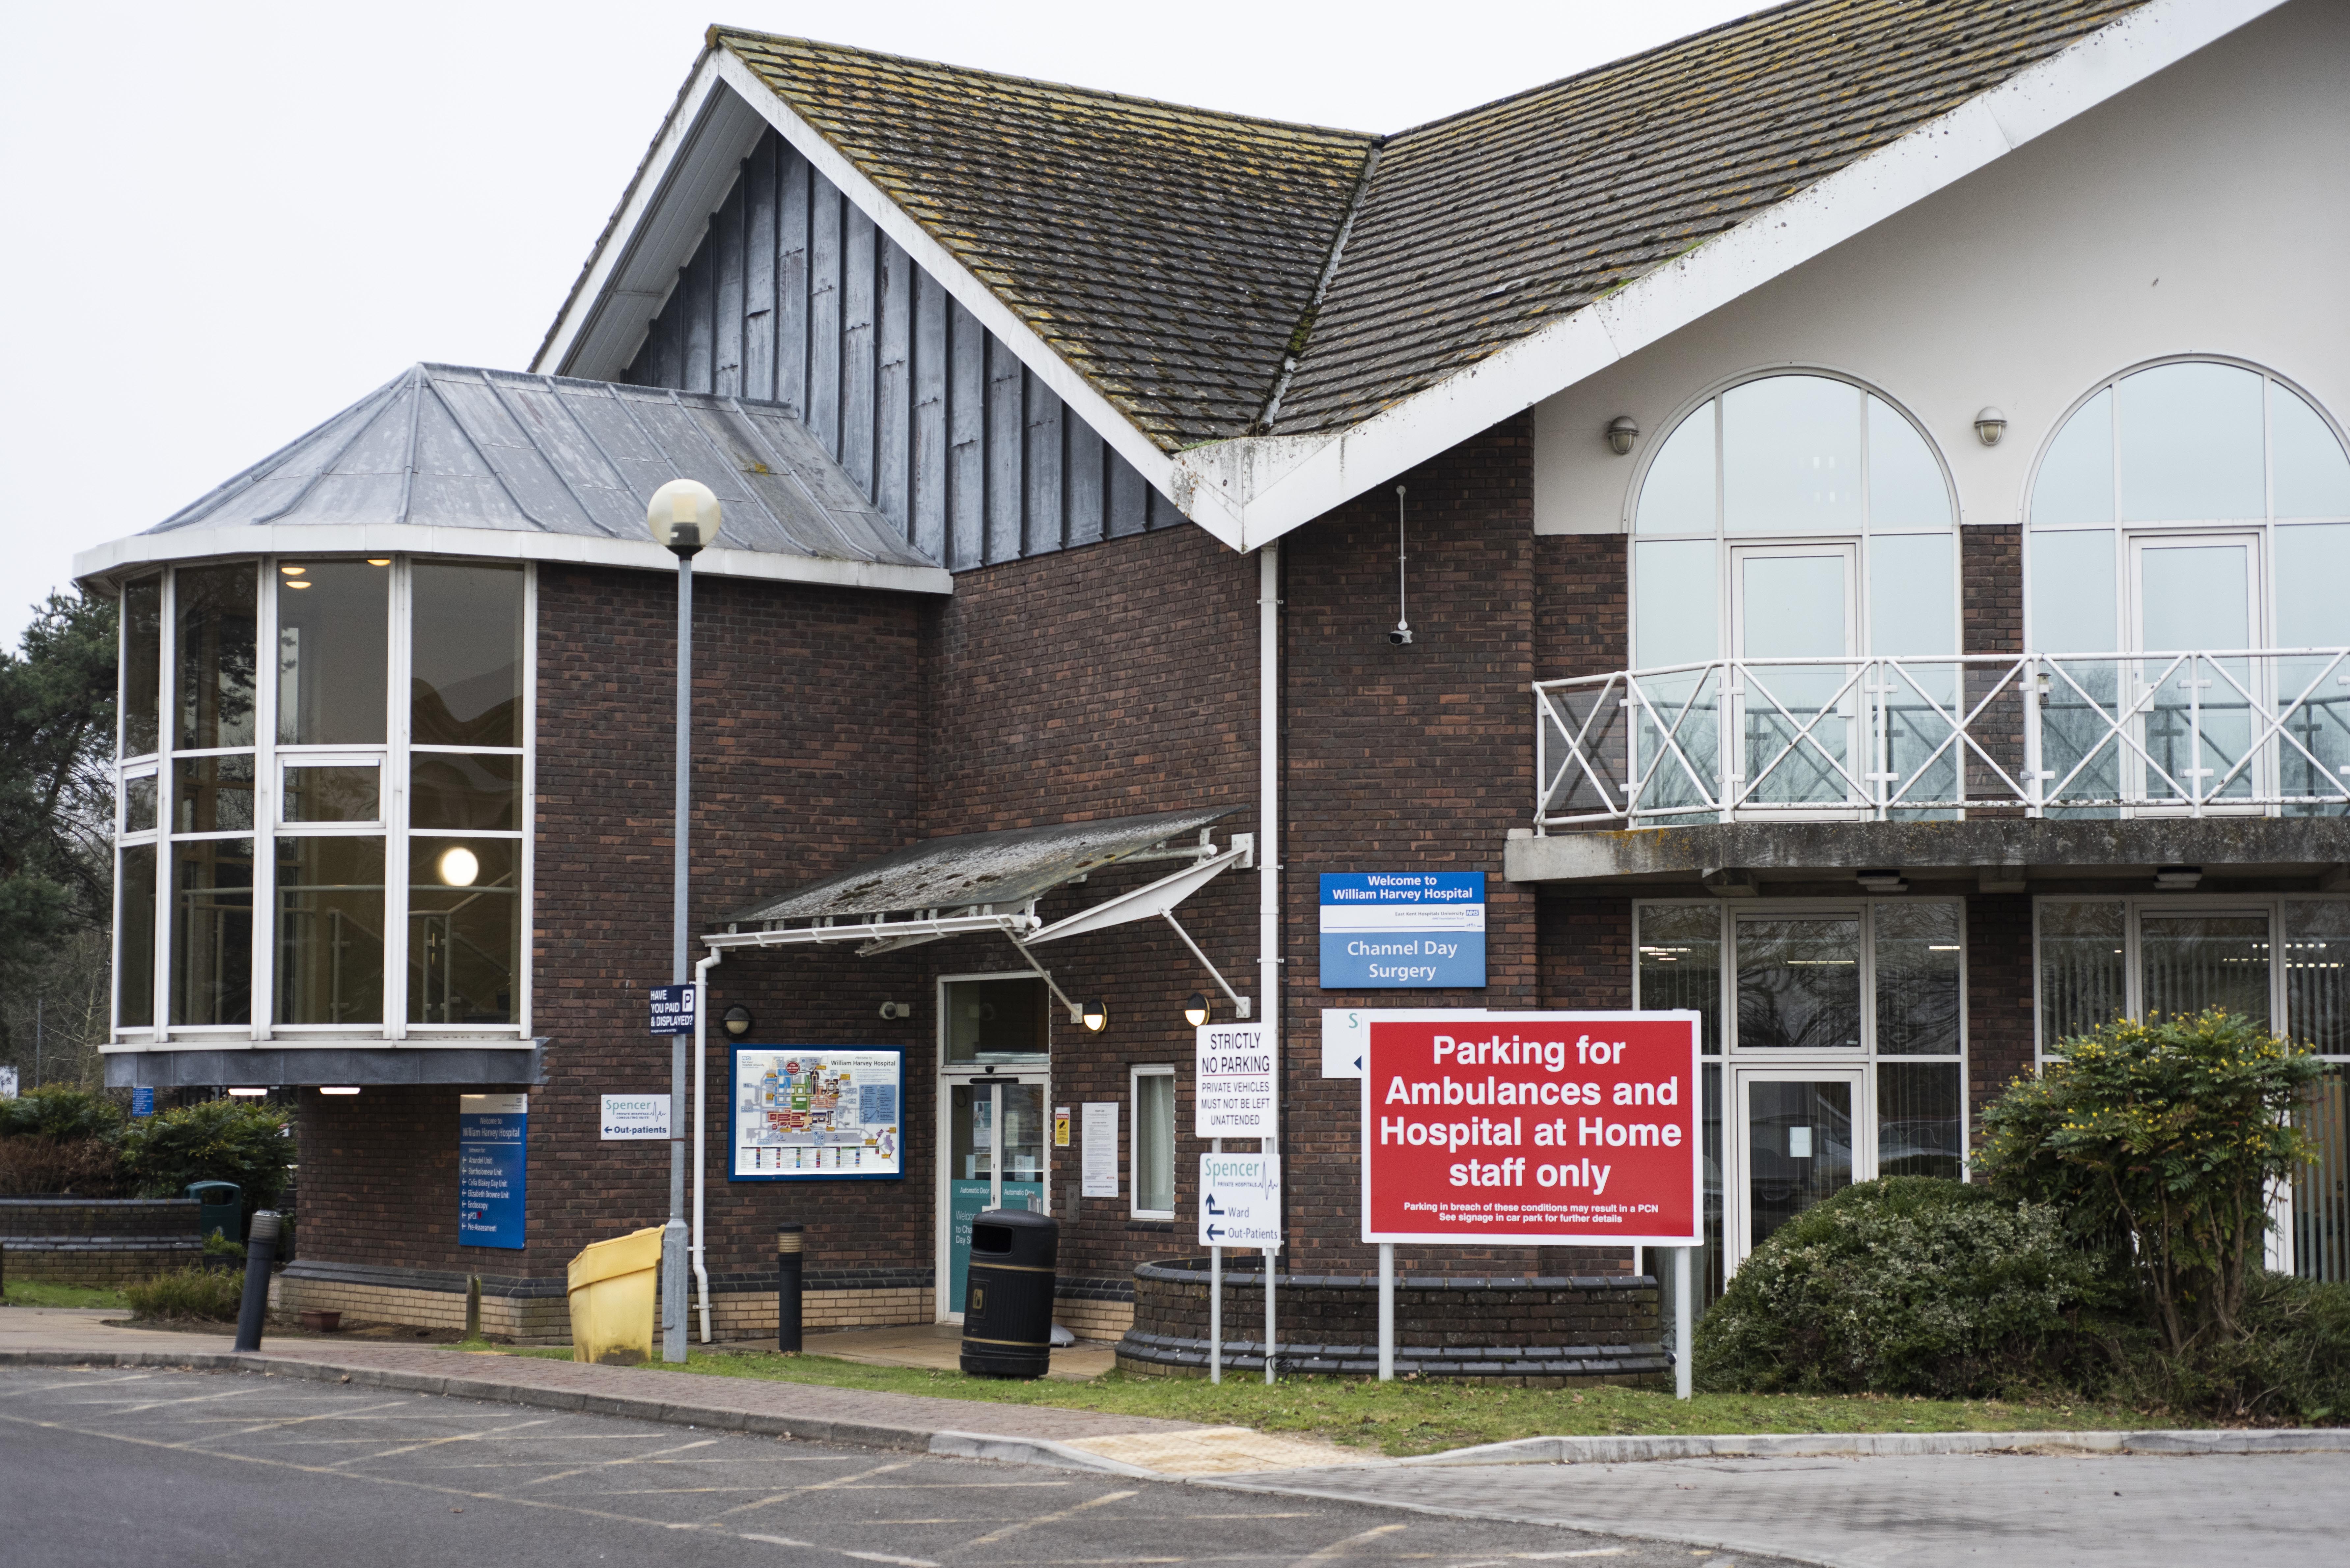 Photo of the entrance to the Channel Day Surgery Centre